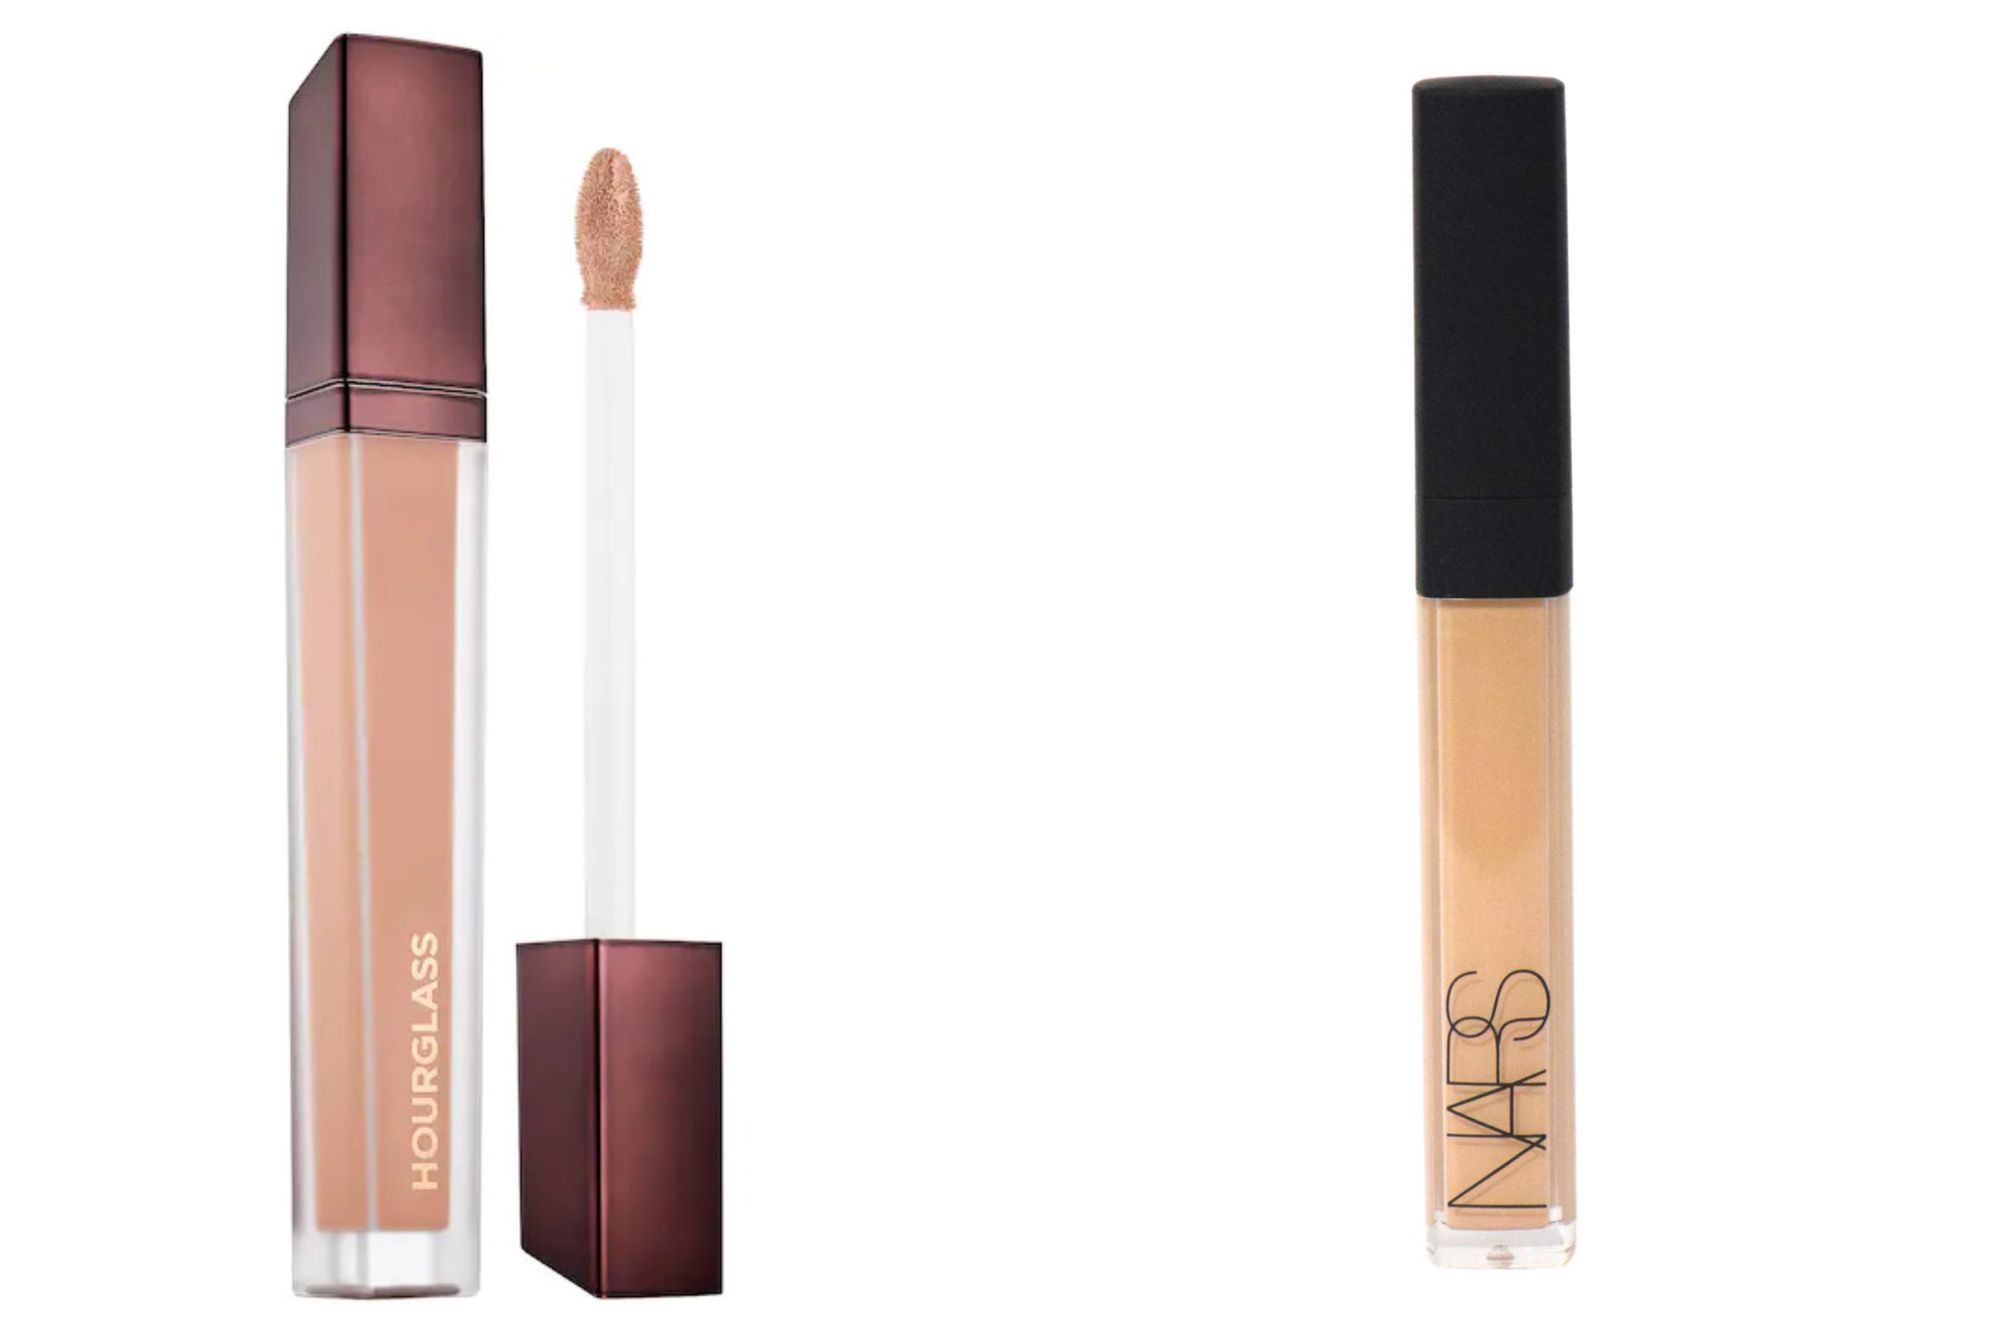 Hourglass, Vanish Airbrush Concealer and NARS, Radiant Creamy Concealer (Source: www.sephora.com, www.amazon.in)